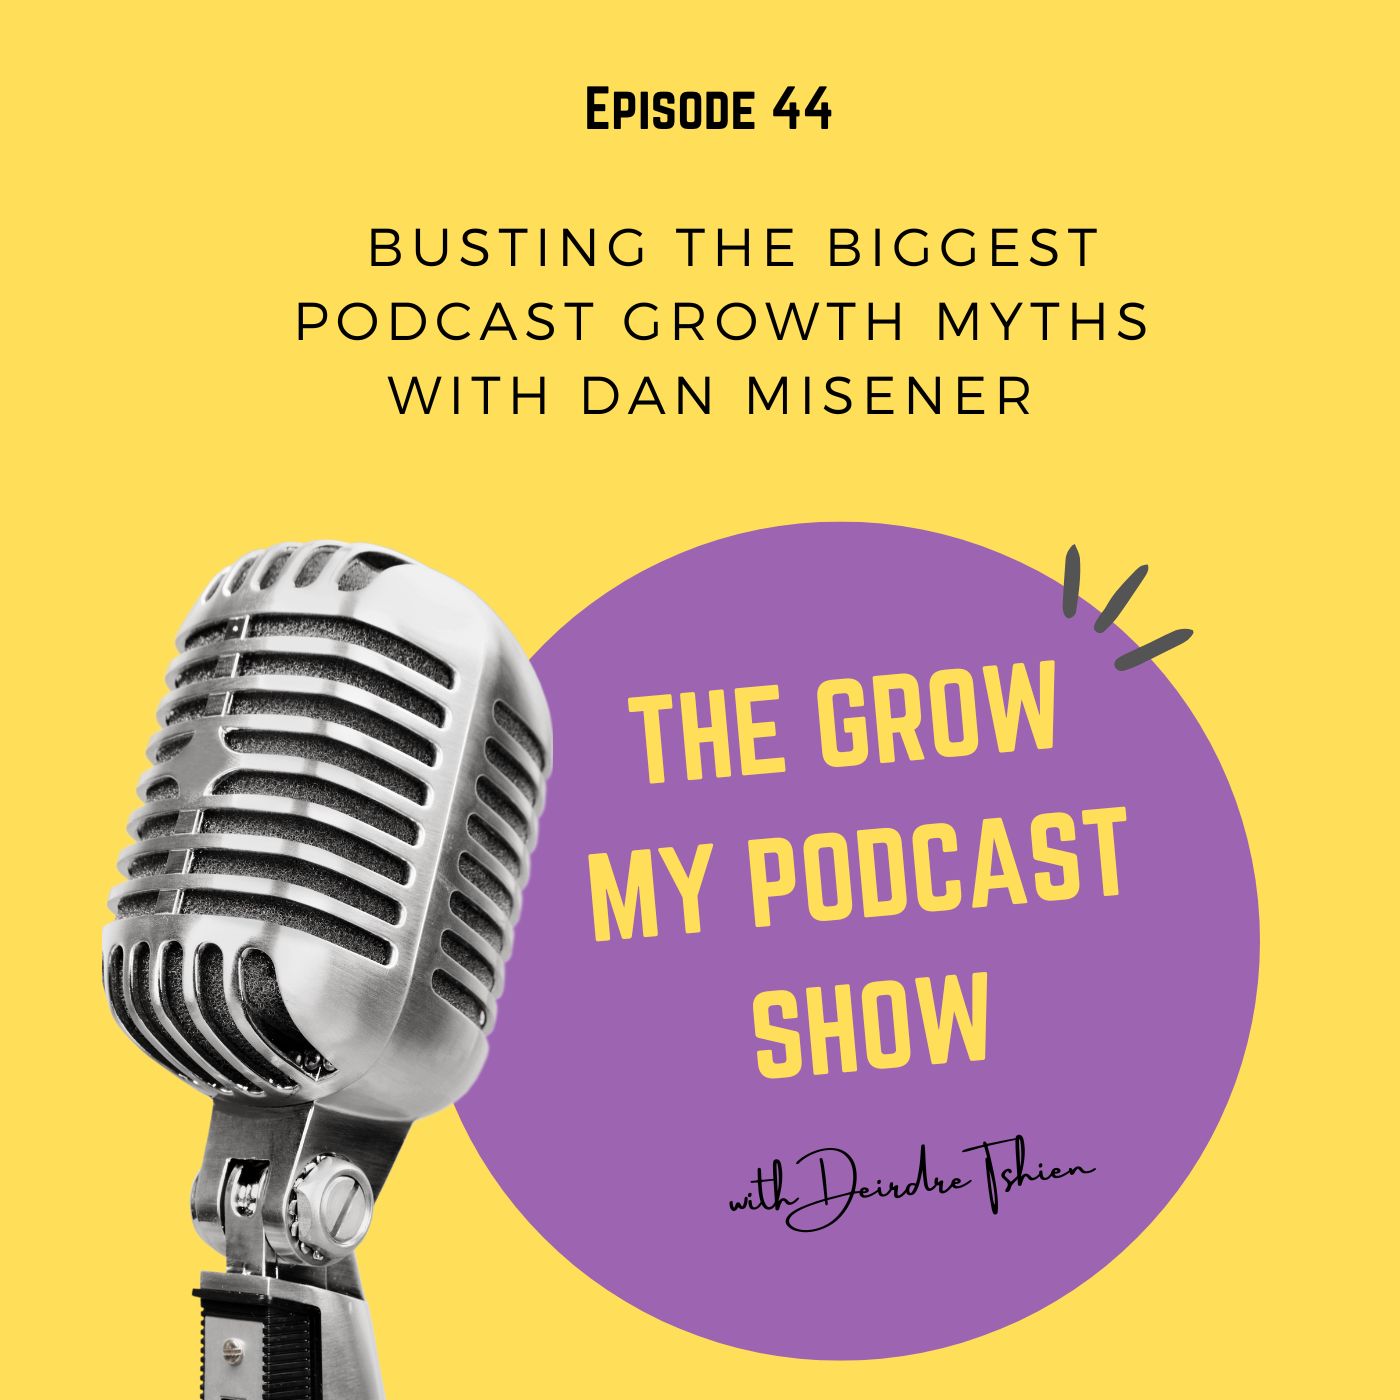 44. Busting the biggest podcast growth myths with Dan Misener